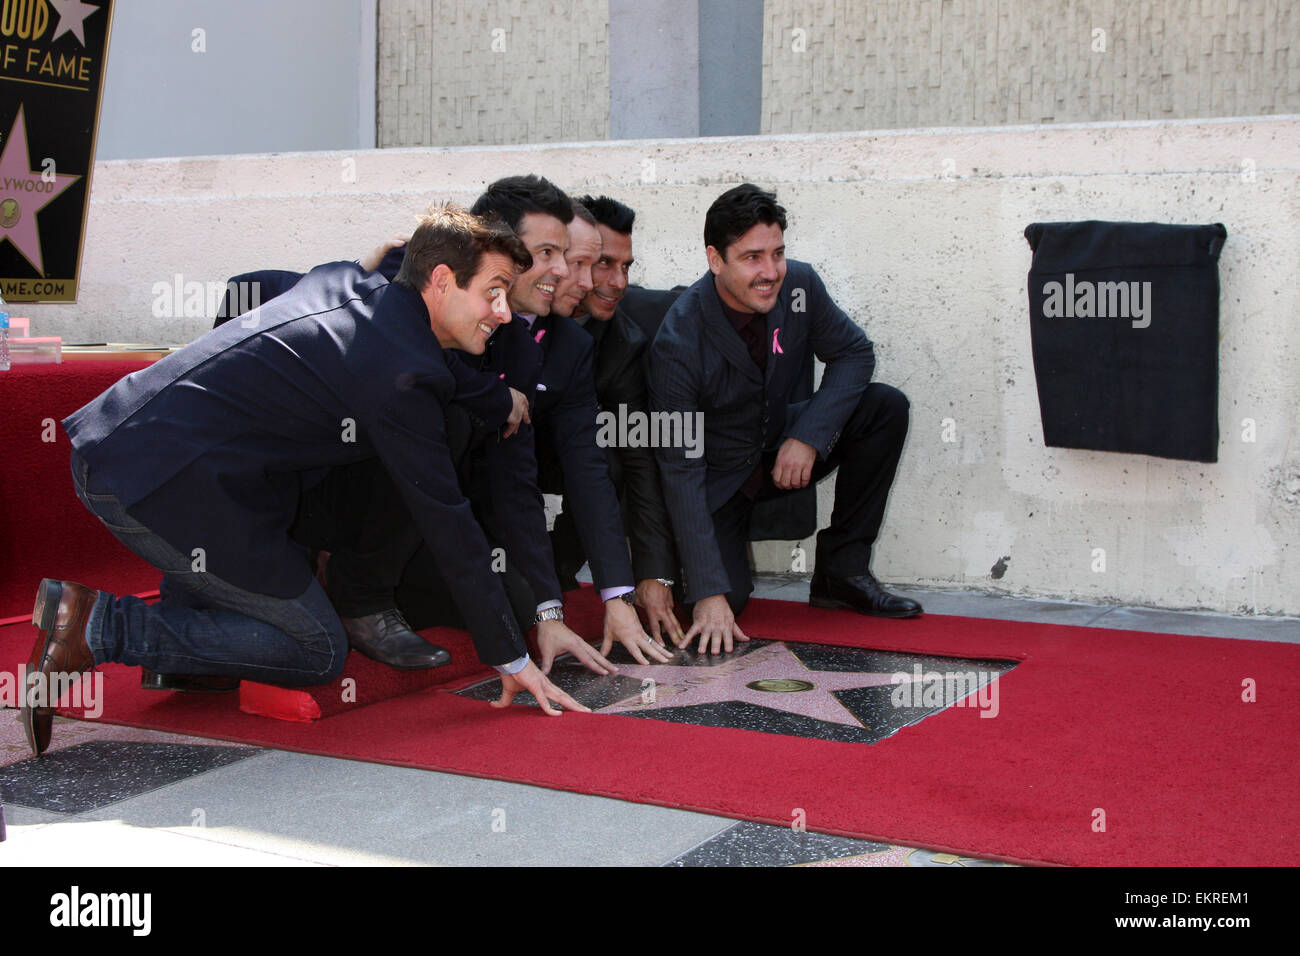 New Kids on the Block Hollywood Walk of Fame Star Ceremony  Featuring: New Kids On The Block,Jordan Knight,Donnie Wahlberg,Joe McIntyre,Danny Wood,Jonathan Knight Where: Los Angeles, California, United States When: 09 Oct 2014 Stock Photo